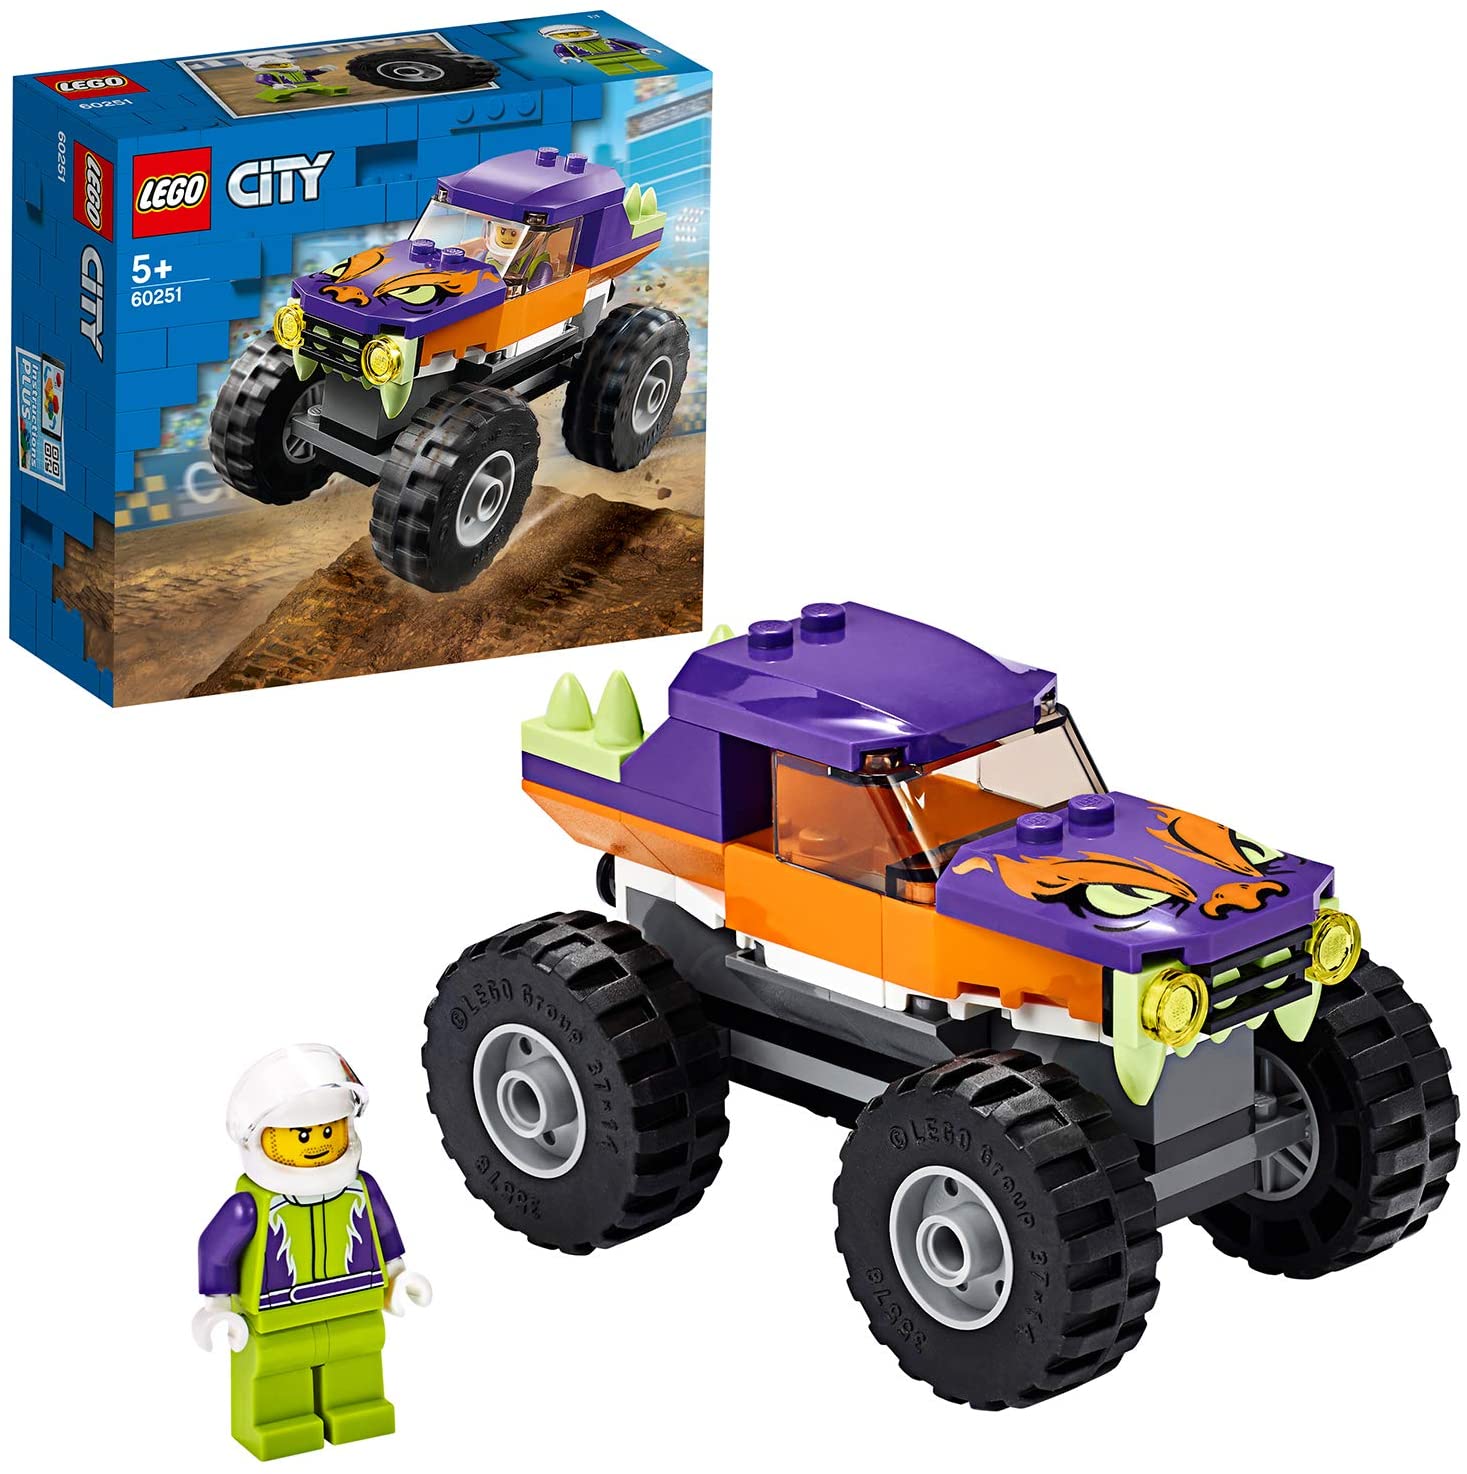 Lego 60251 Monster Truck City, Toy For Children 5 Years And Up